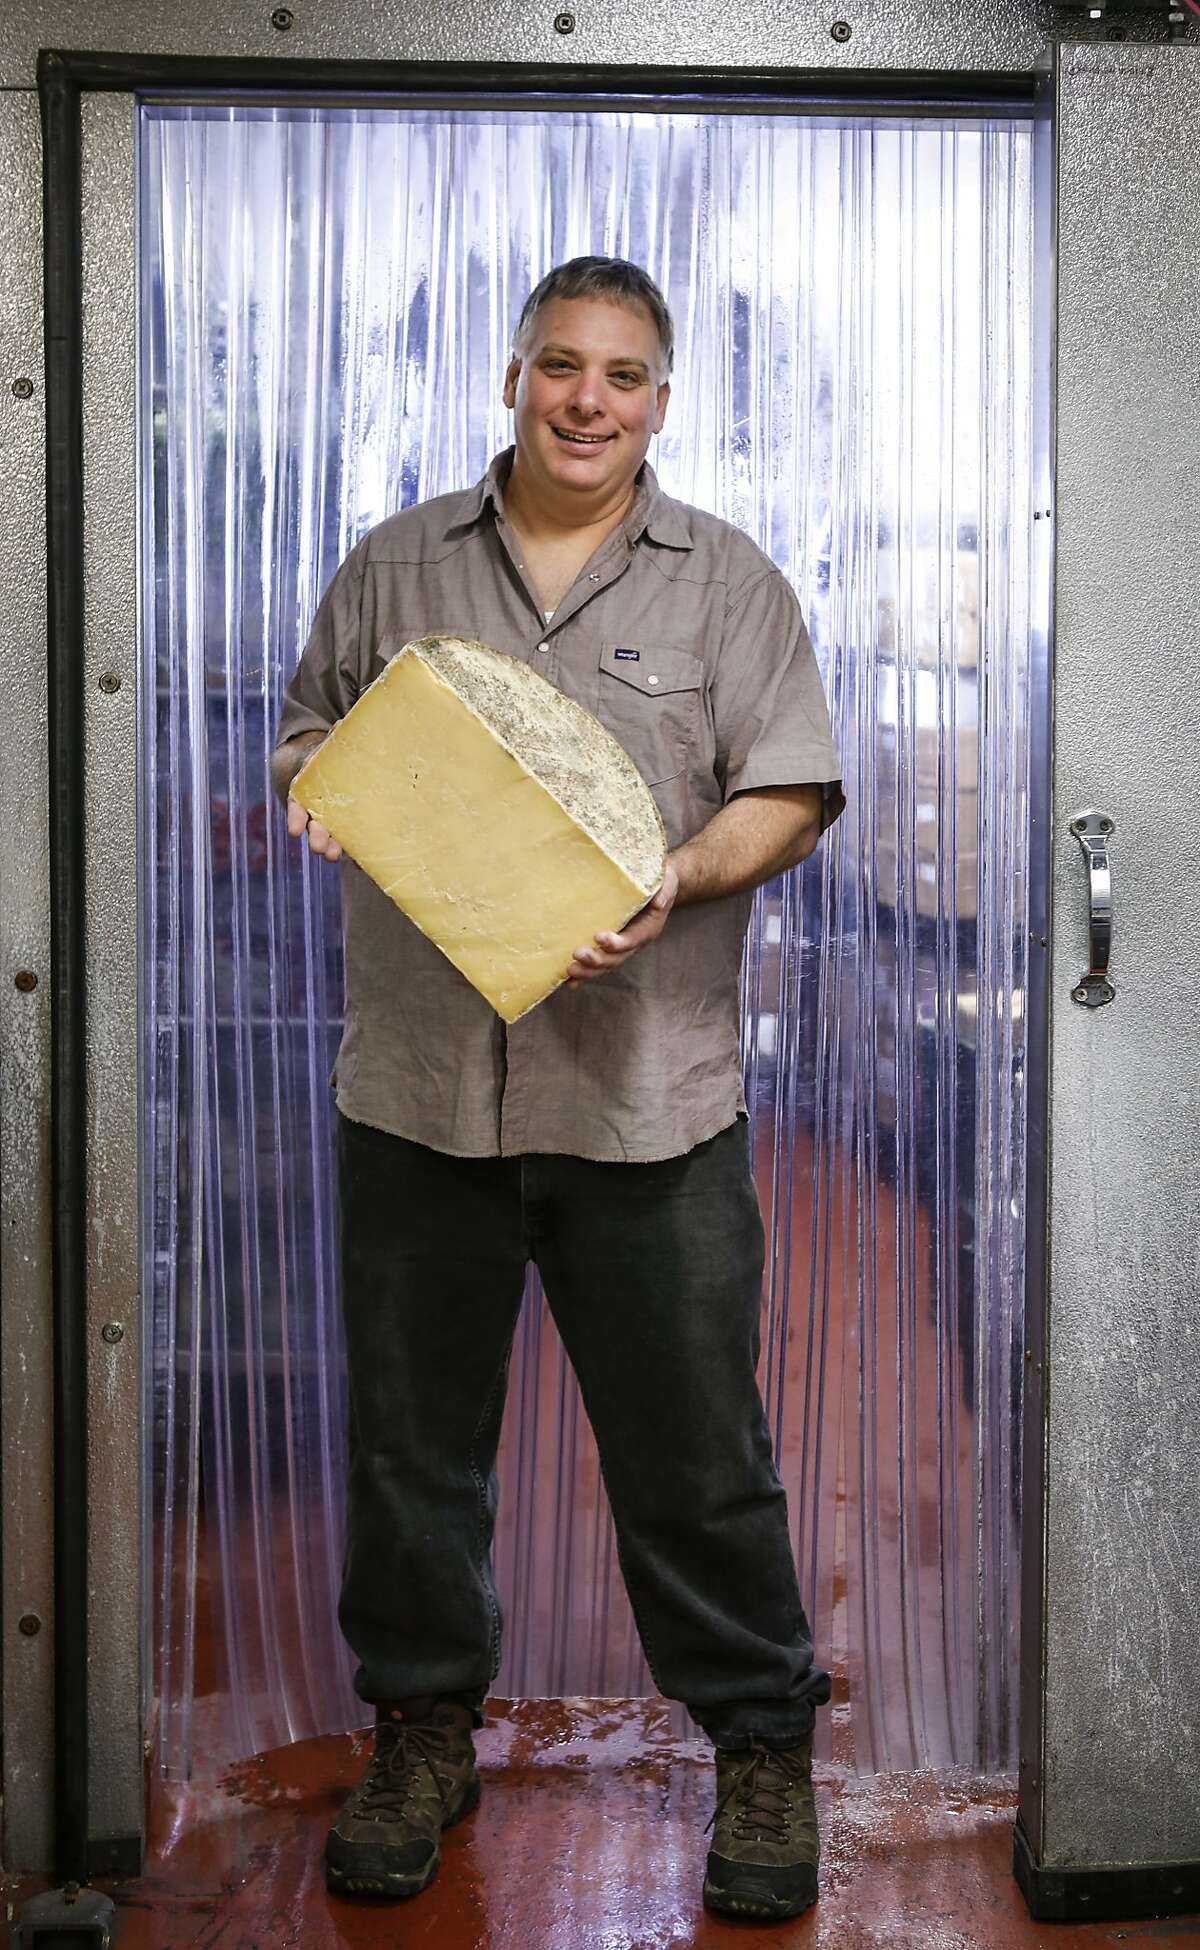 Gordon Edgar, the cheese buyer at Rainbow Grocery, seen on Thursday, Sept. 24, 2015 in San Francisco, Calif., is coming out with a new book about cheddar which is what he calls the iconic American cheese.